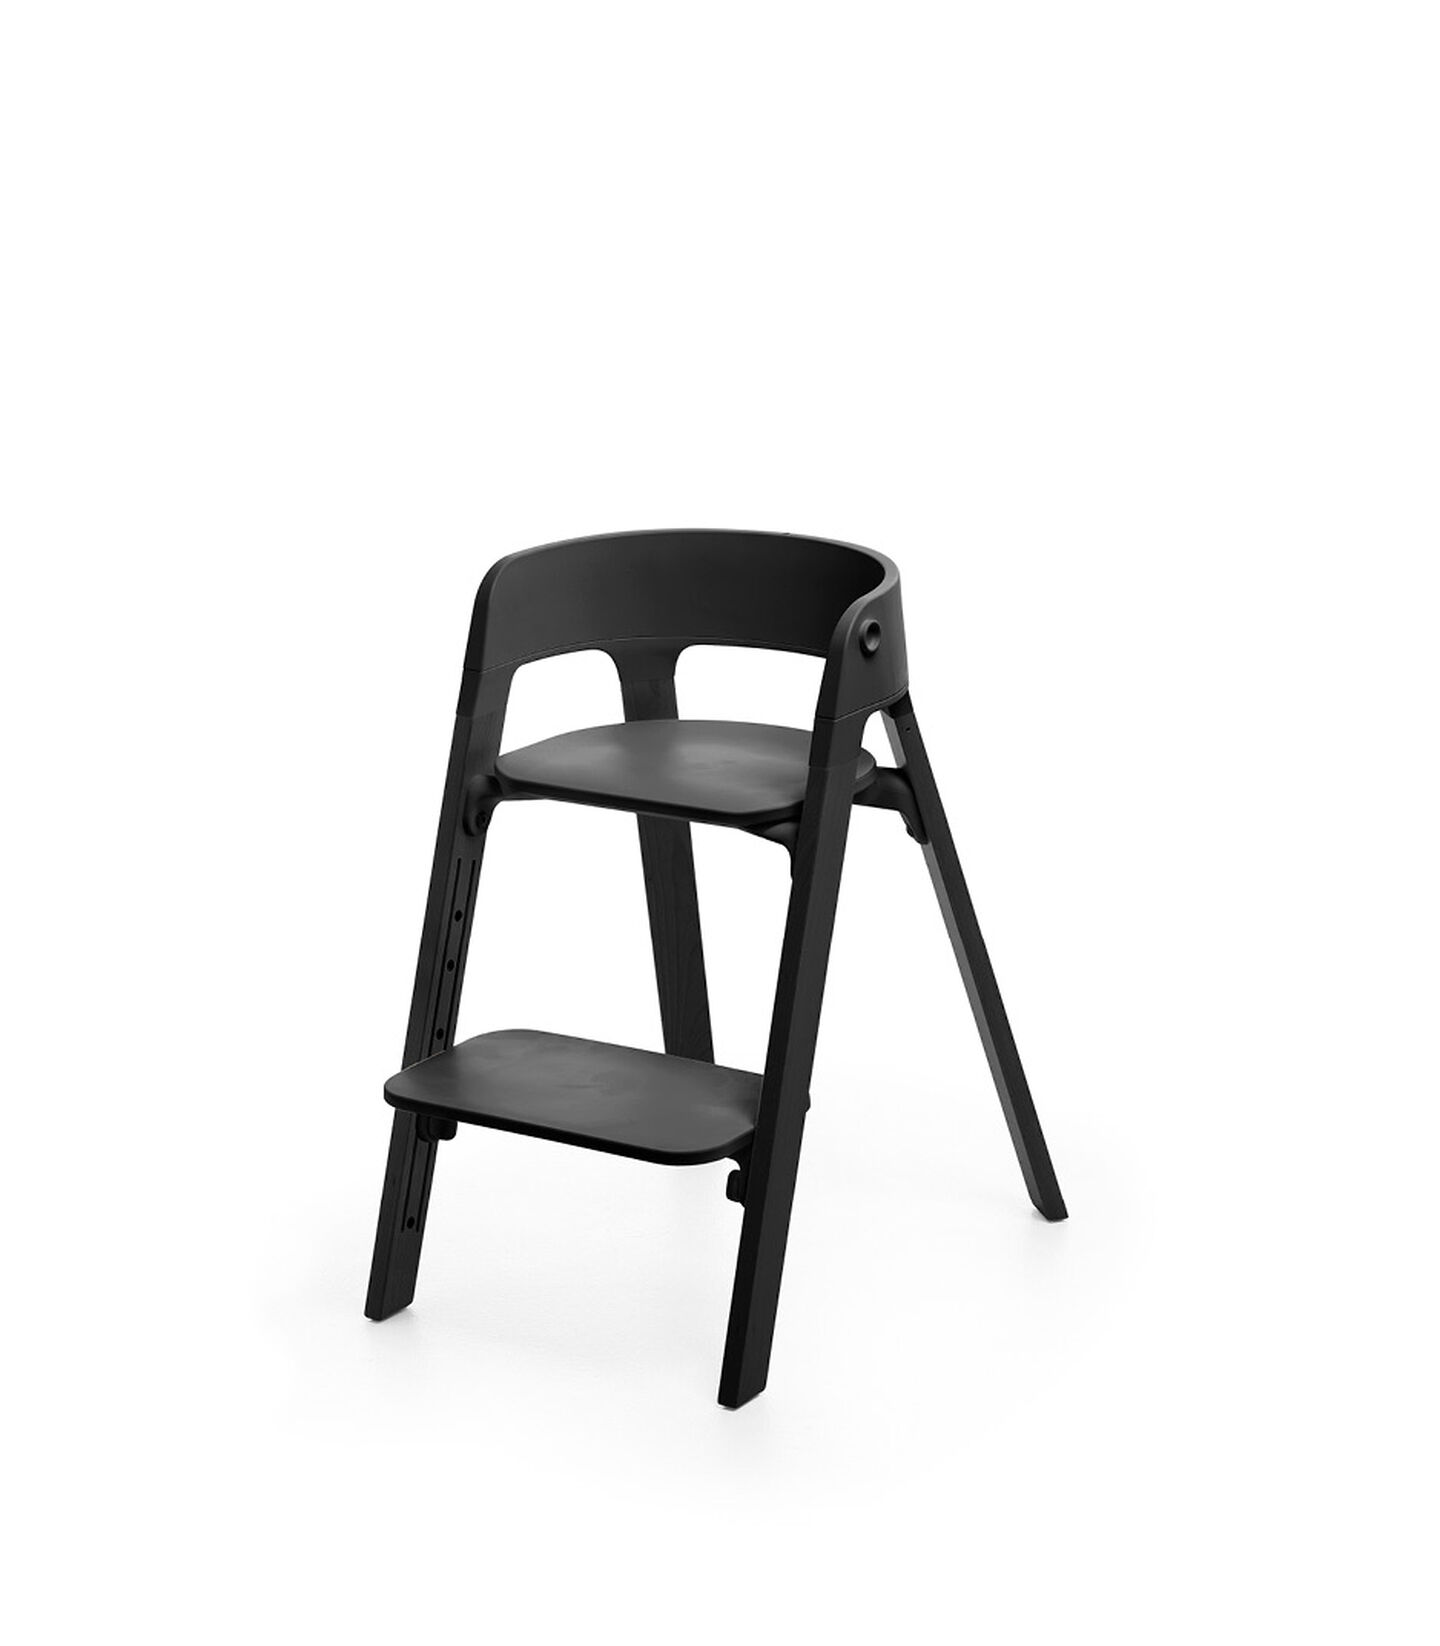 Stokke® Steps™ Chair, Black. Footrest low position. view 1